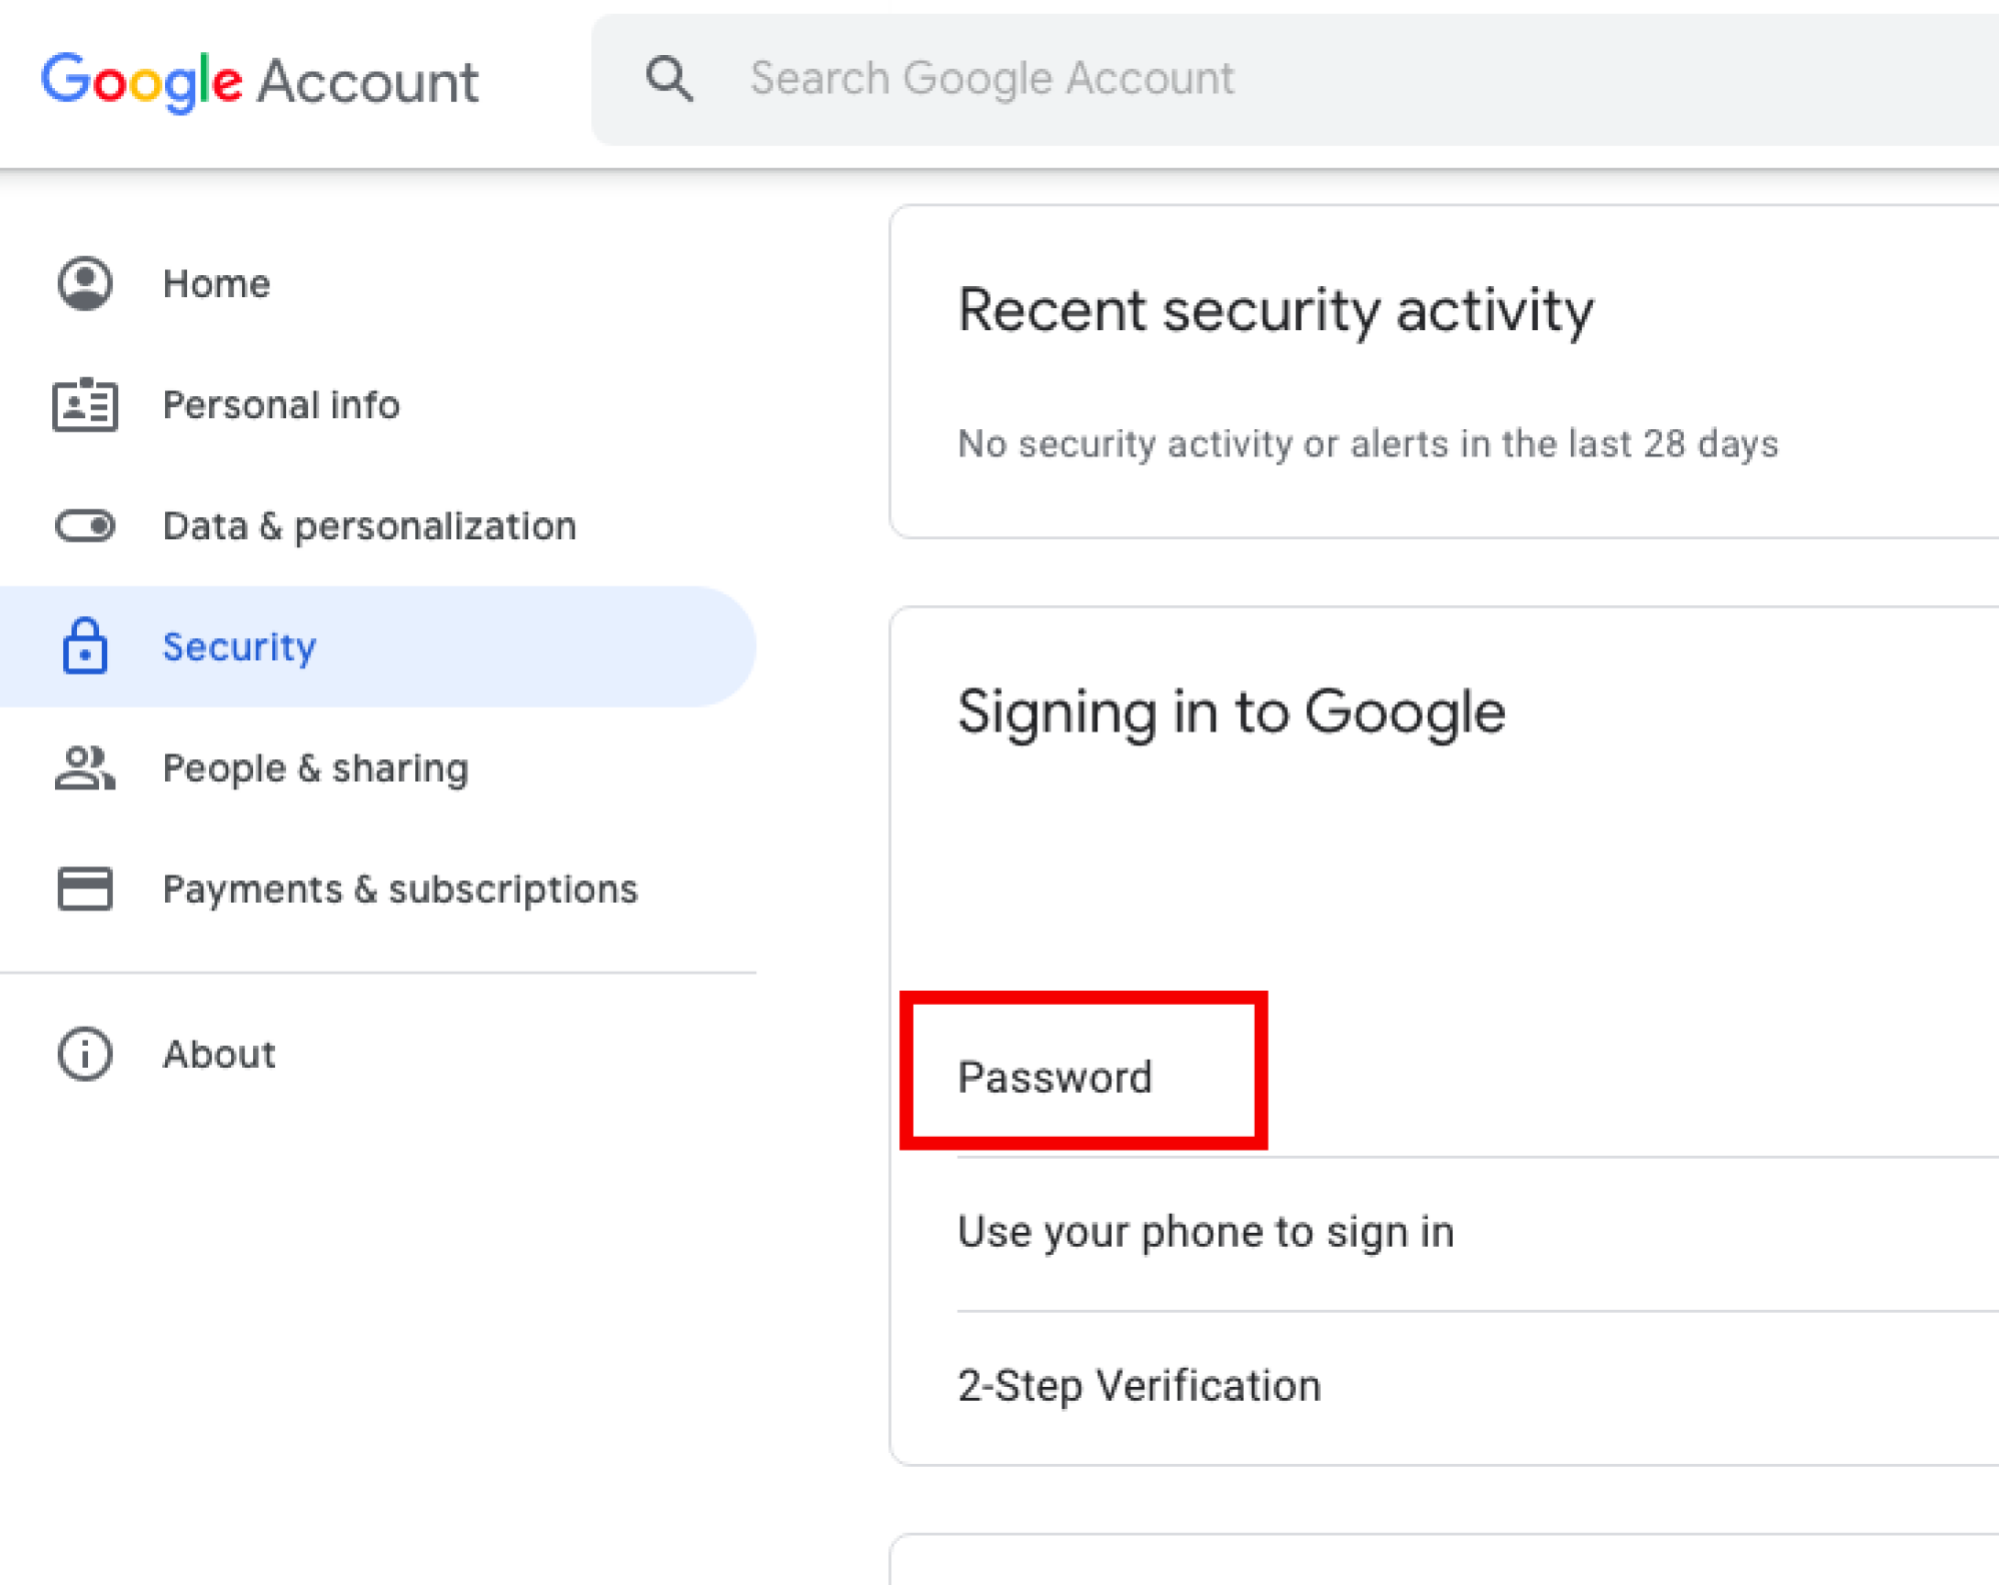 A screenshot of Gmail showing where the "Password" setting is.